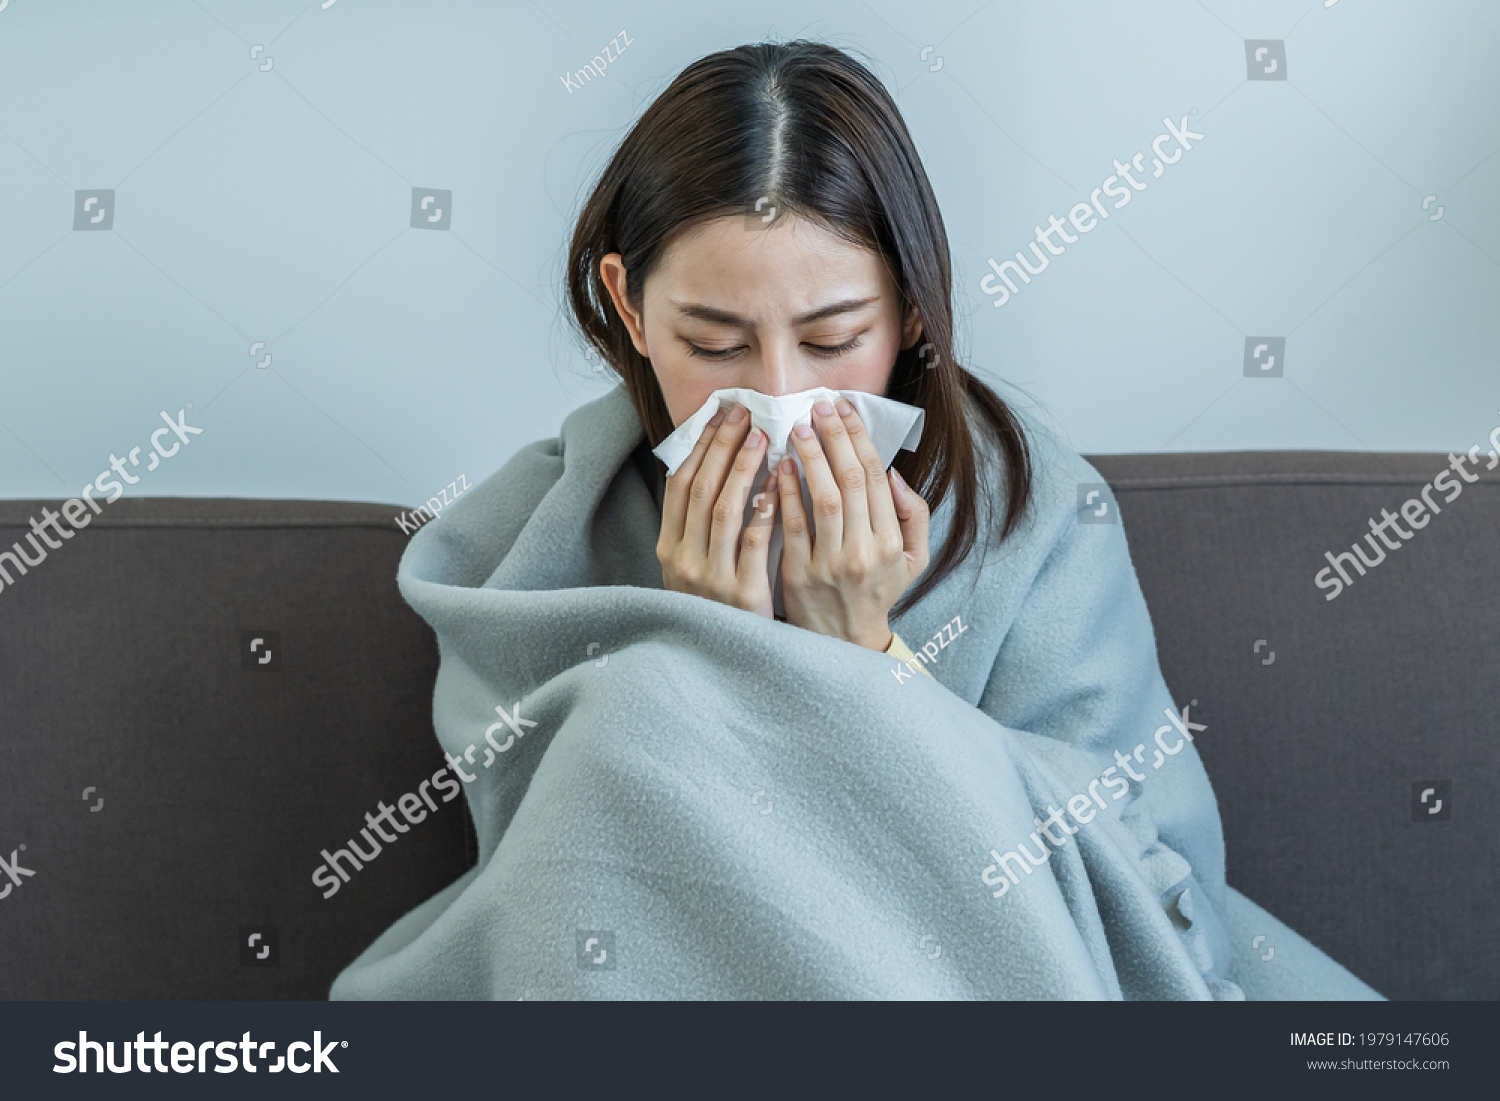 Sick, Coronavirus covid-19 asian young woman, girl headache under blanket have a fever, flu and use tissues paper sneezing nose, runny sitting on sofa bed at home. Health care on virus person. #1979147606